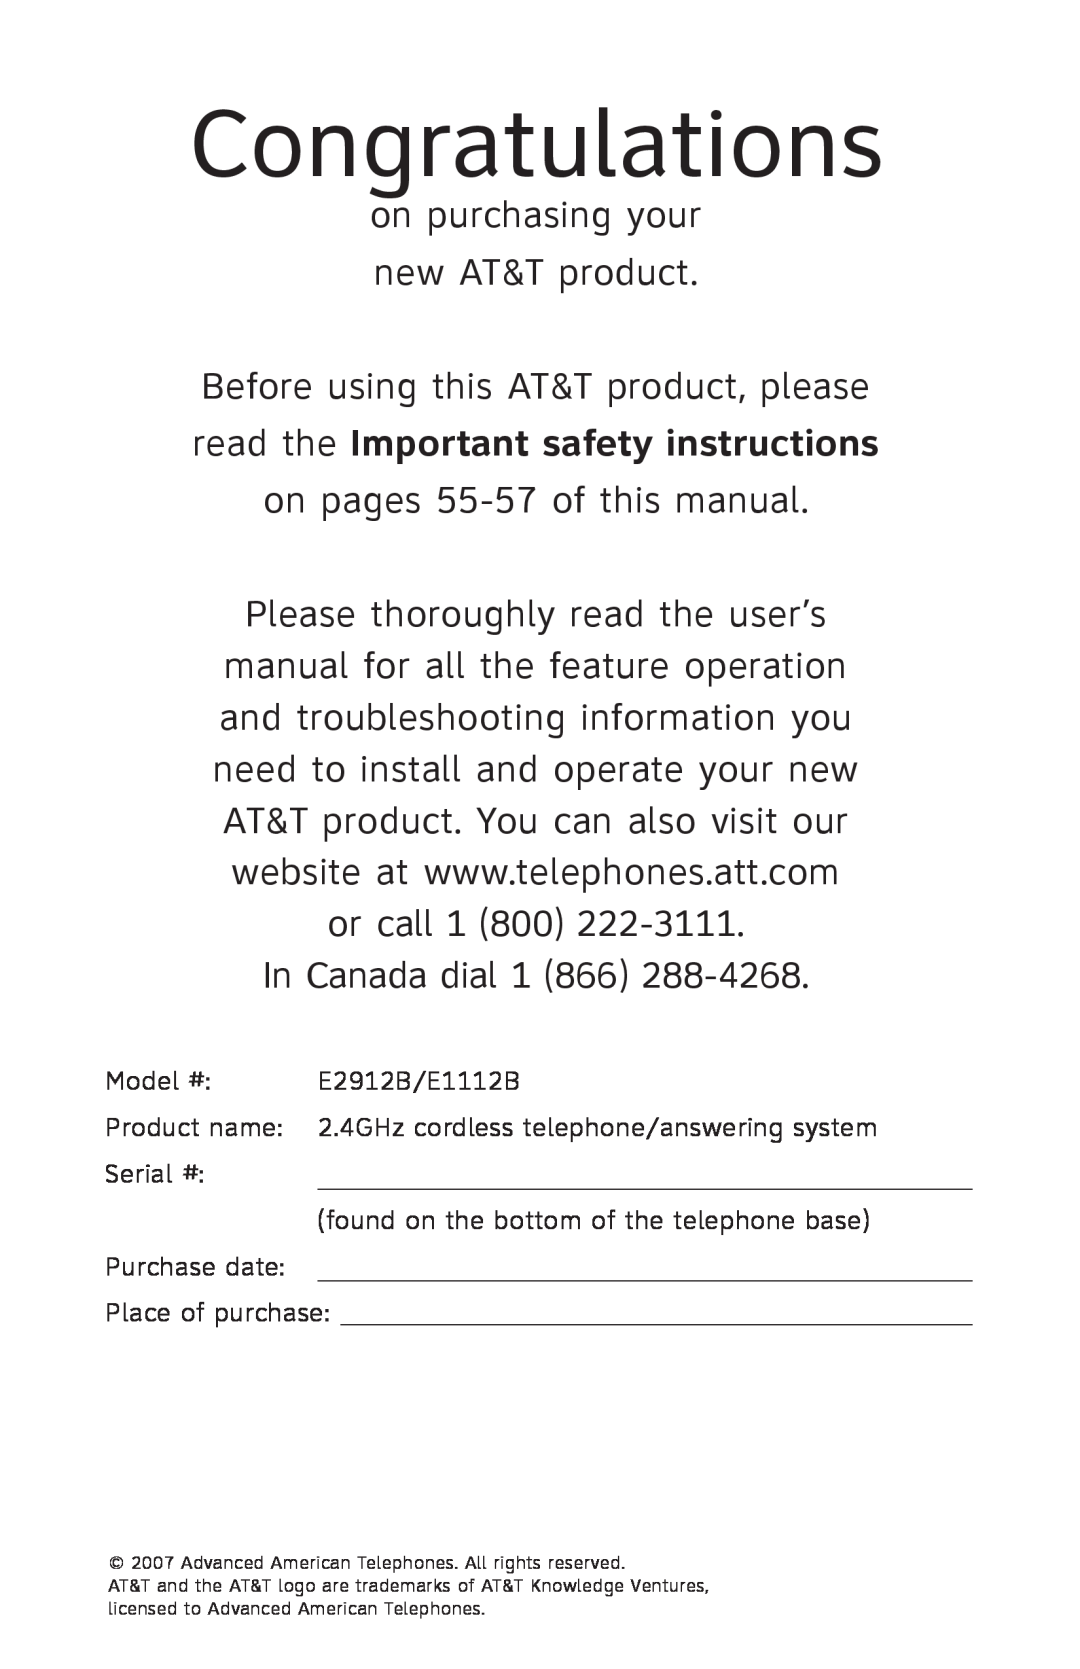 AT&T E2912 on purchasing your new AT&T product, Before using this AT&T product, please, on pages 55-57 of this manual 